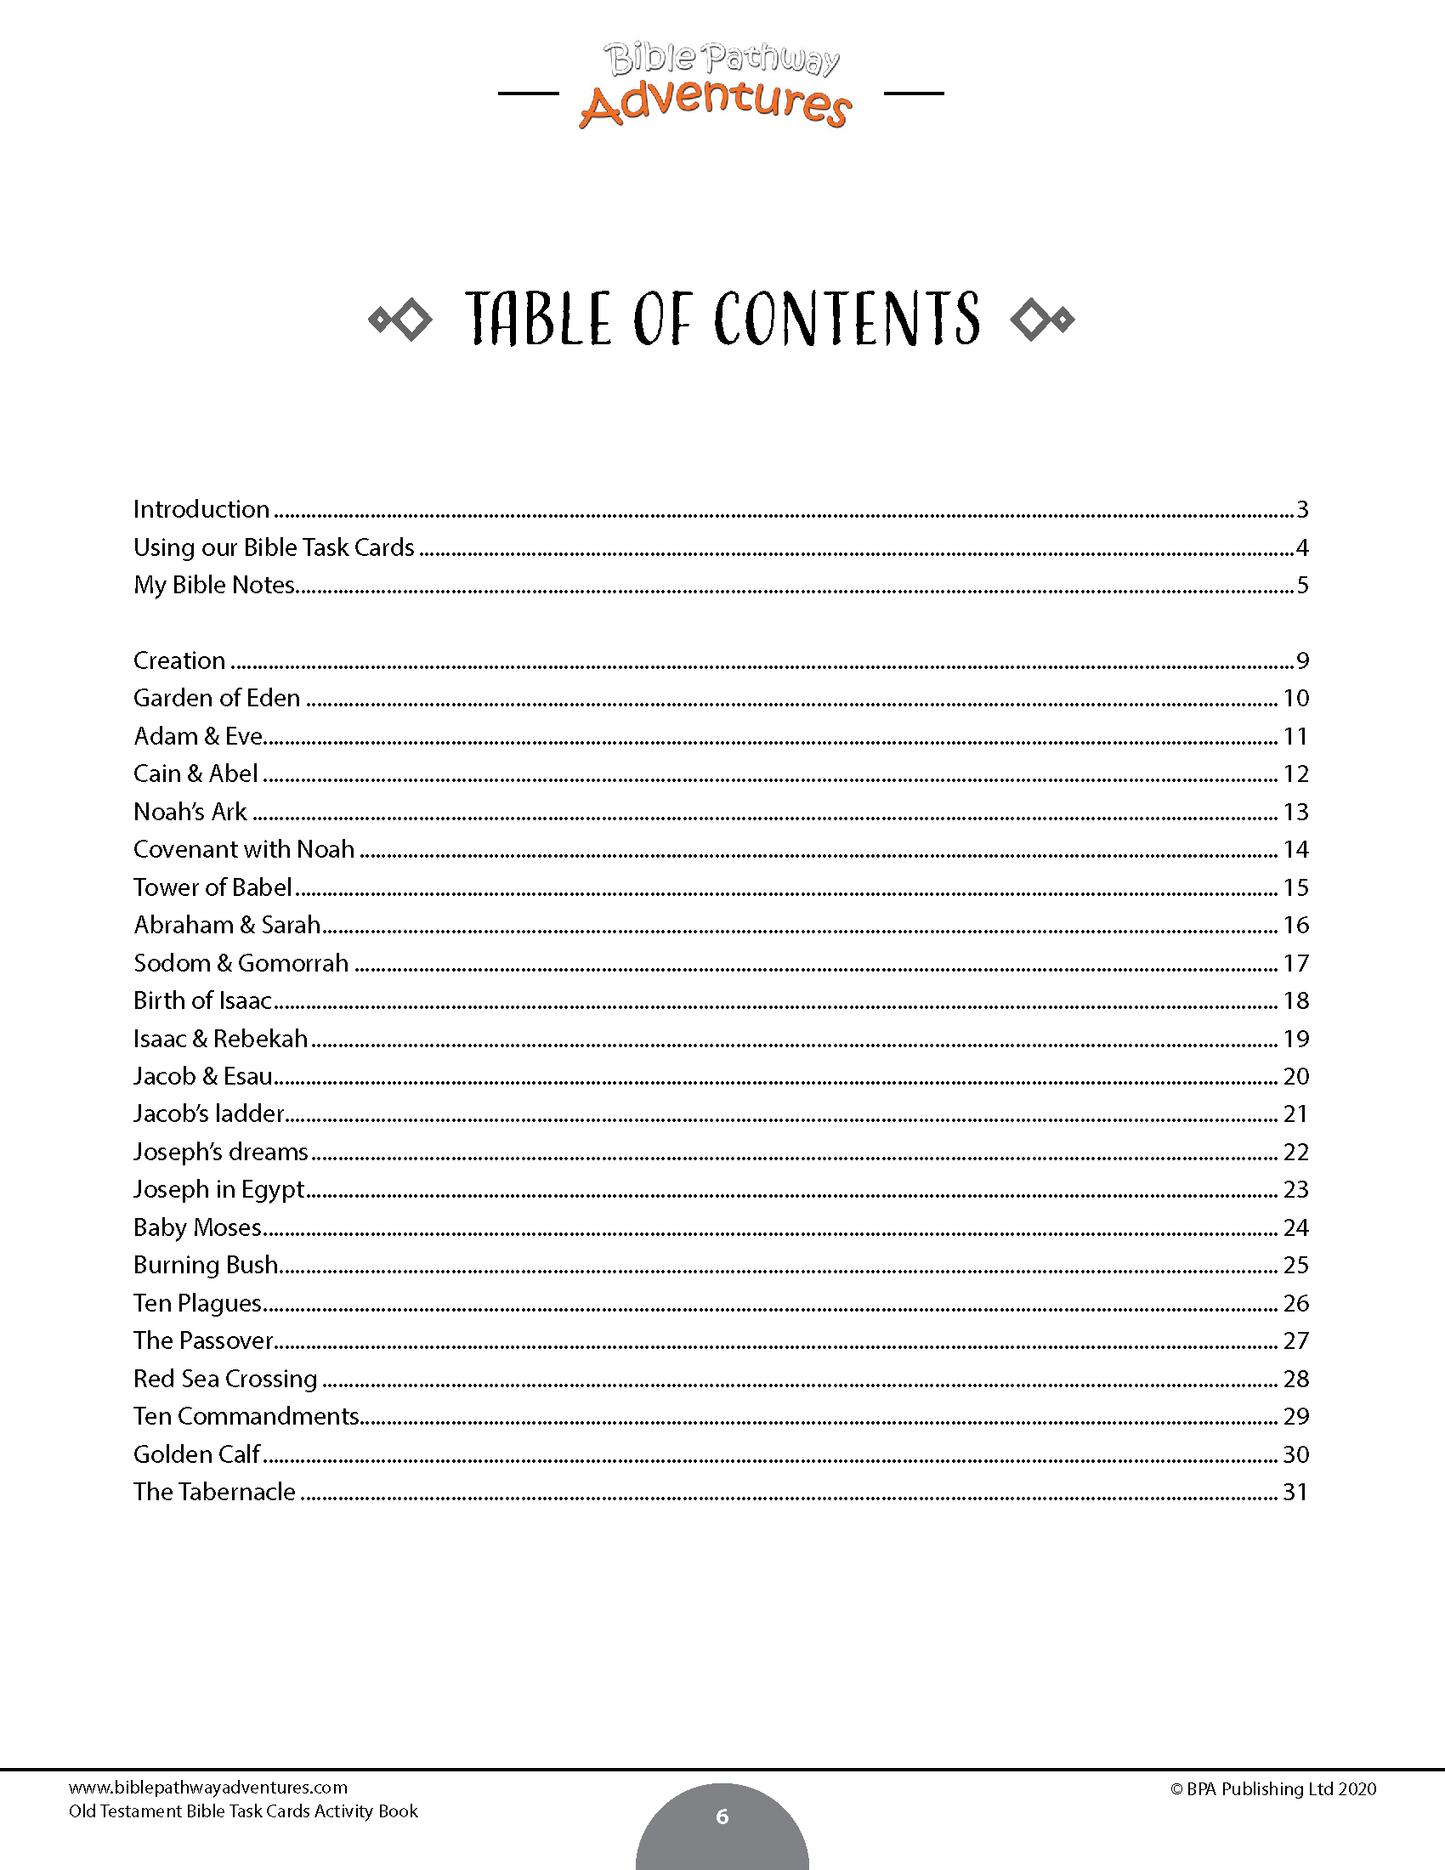 Old Testament Bible Task Cards Activity Book